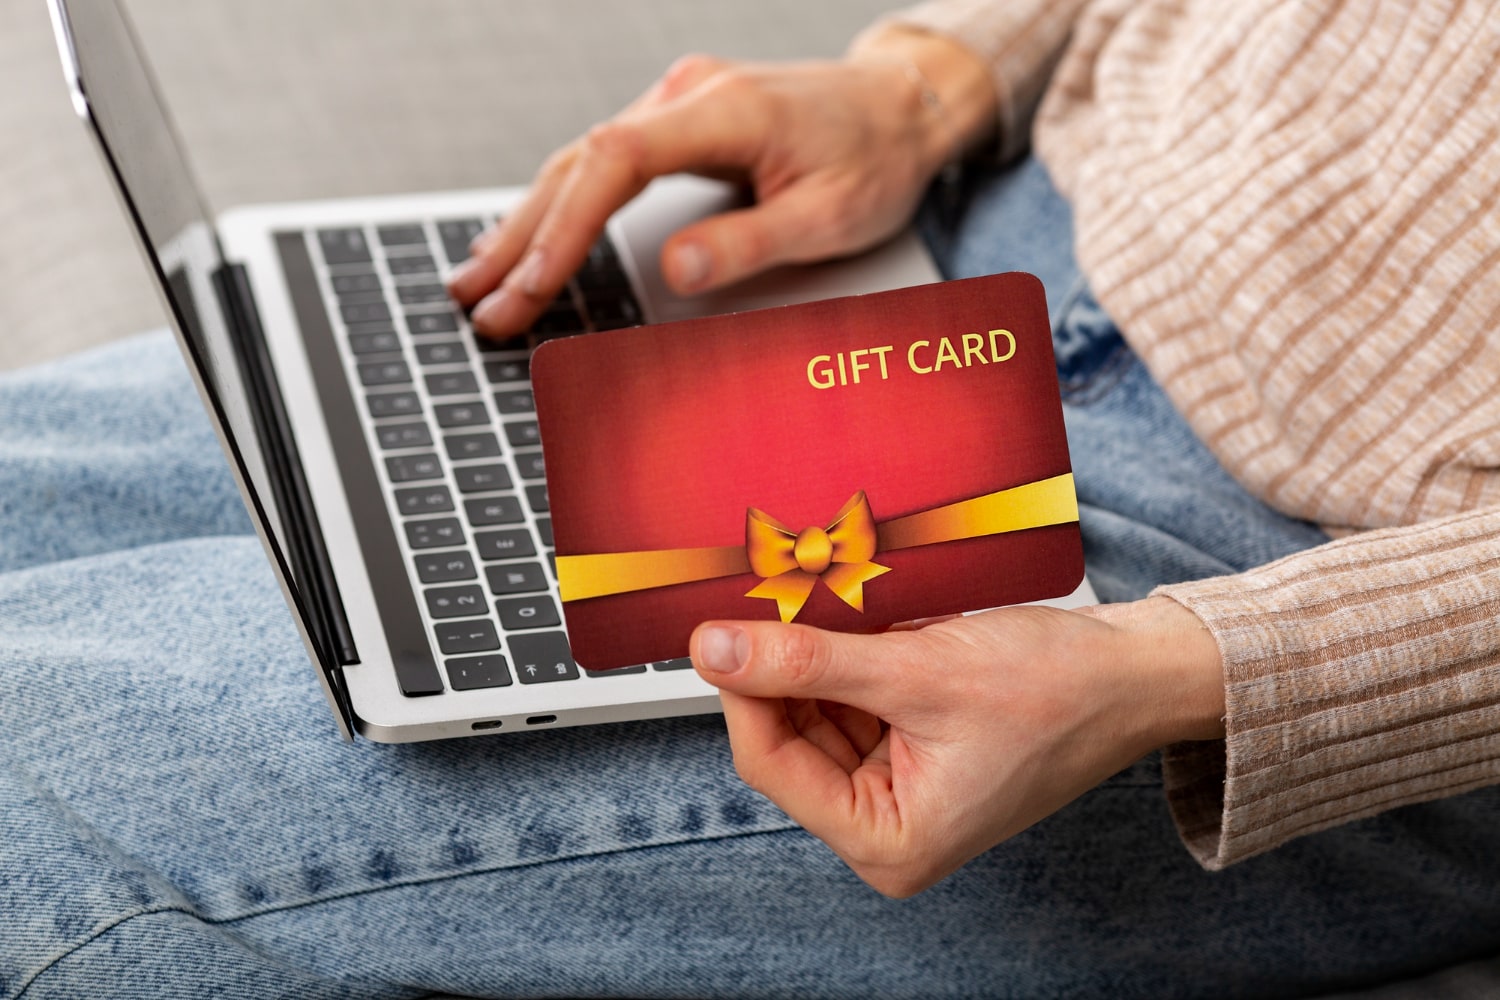 How to Add Visa Gift Card to Amazon: A Complete Step-by-Step Guide